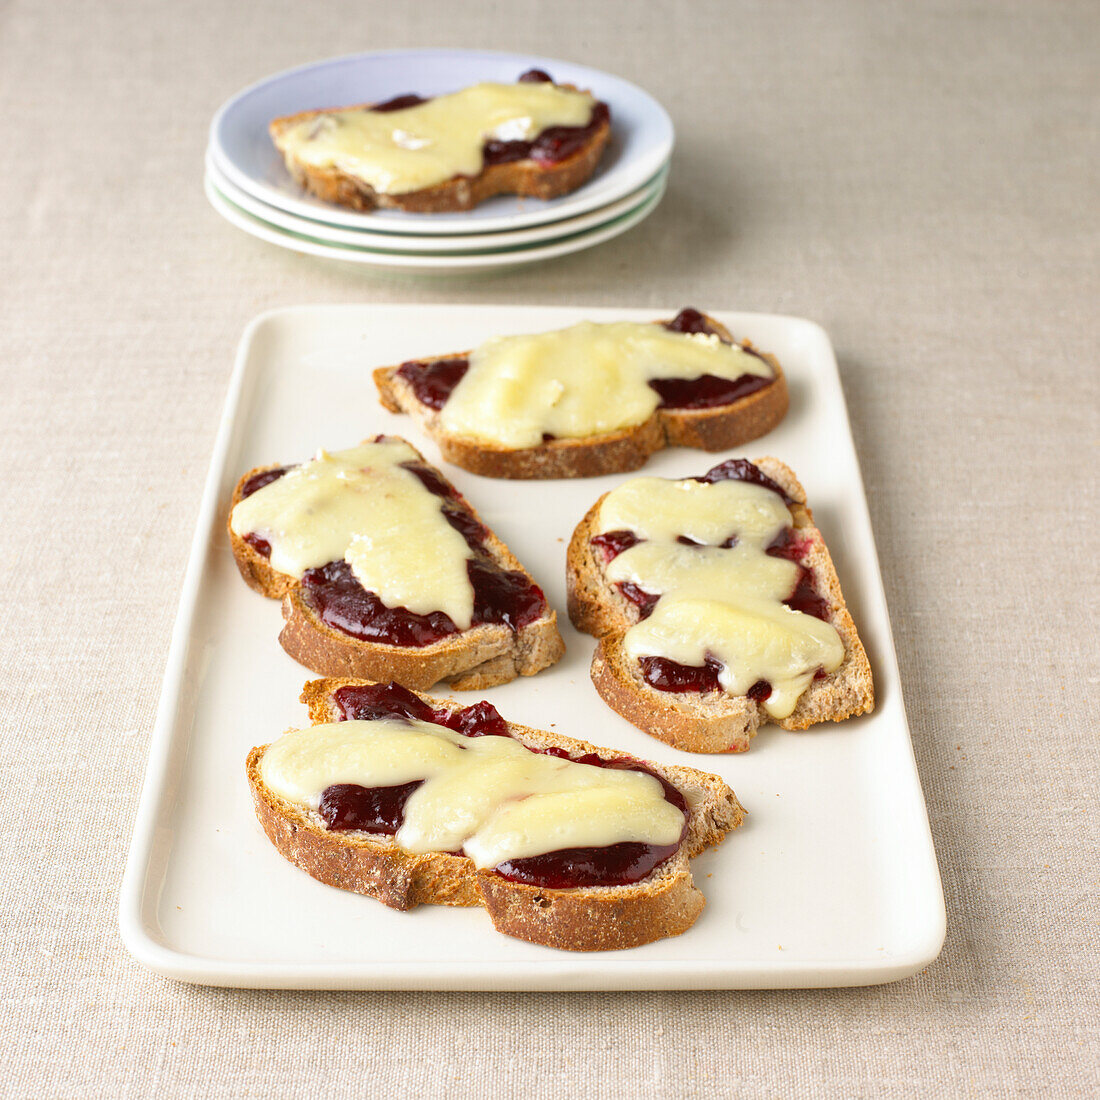 Brie, cranberry and walnut toast